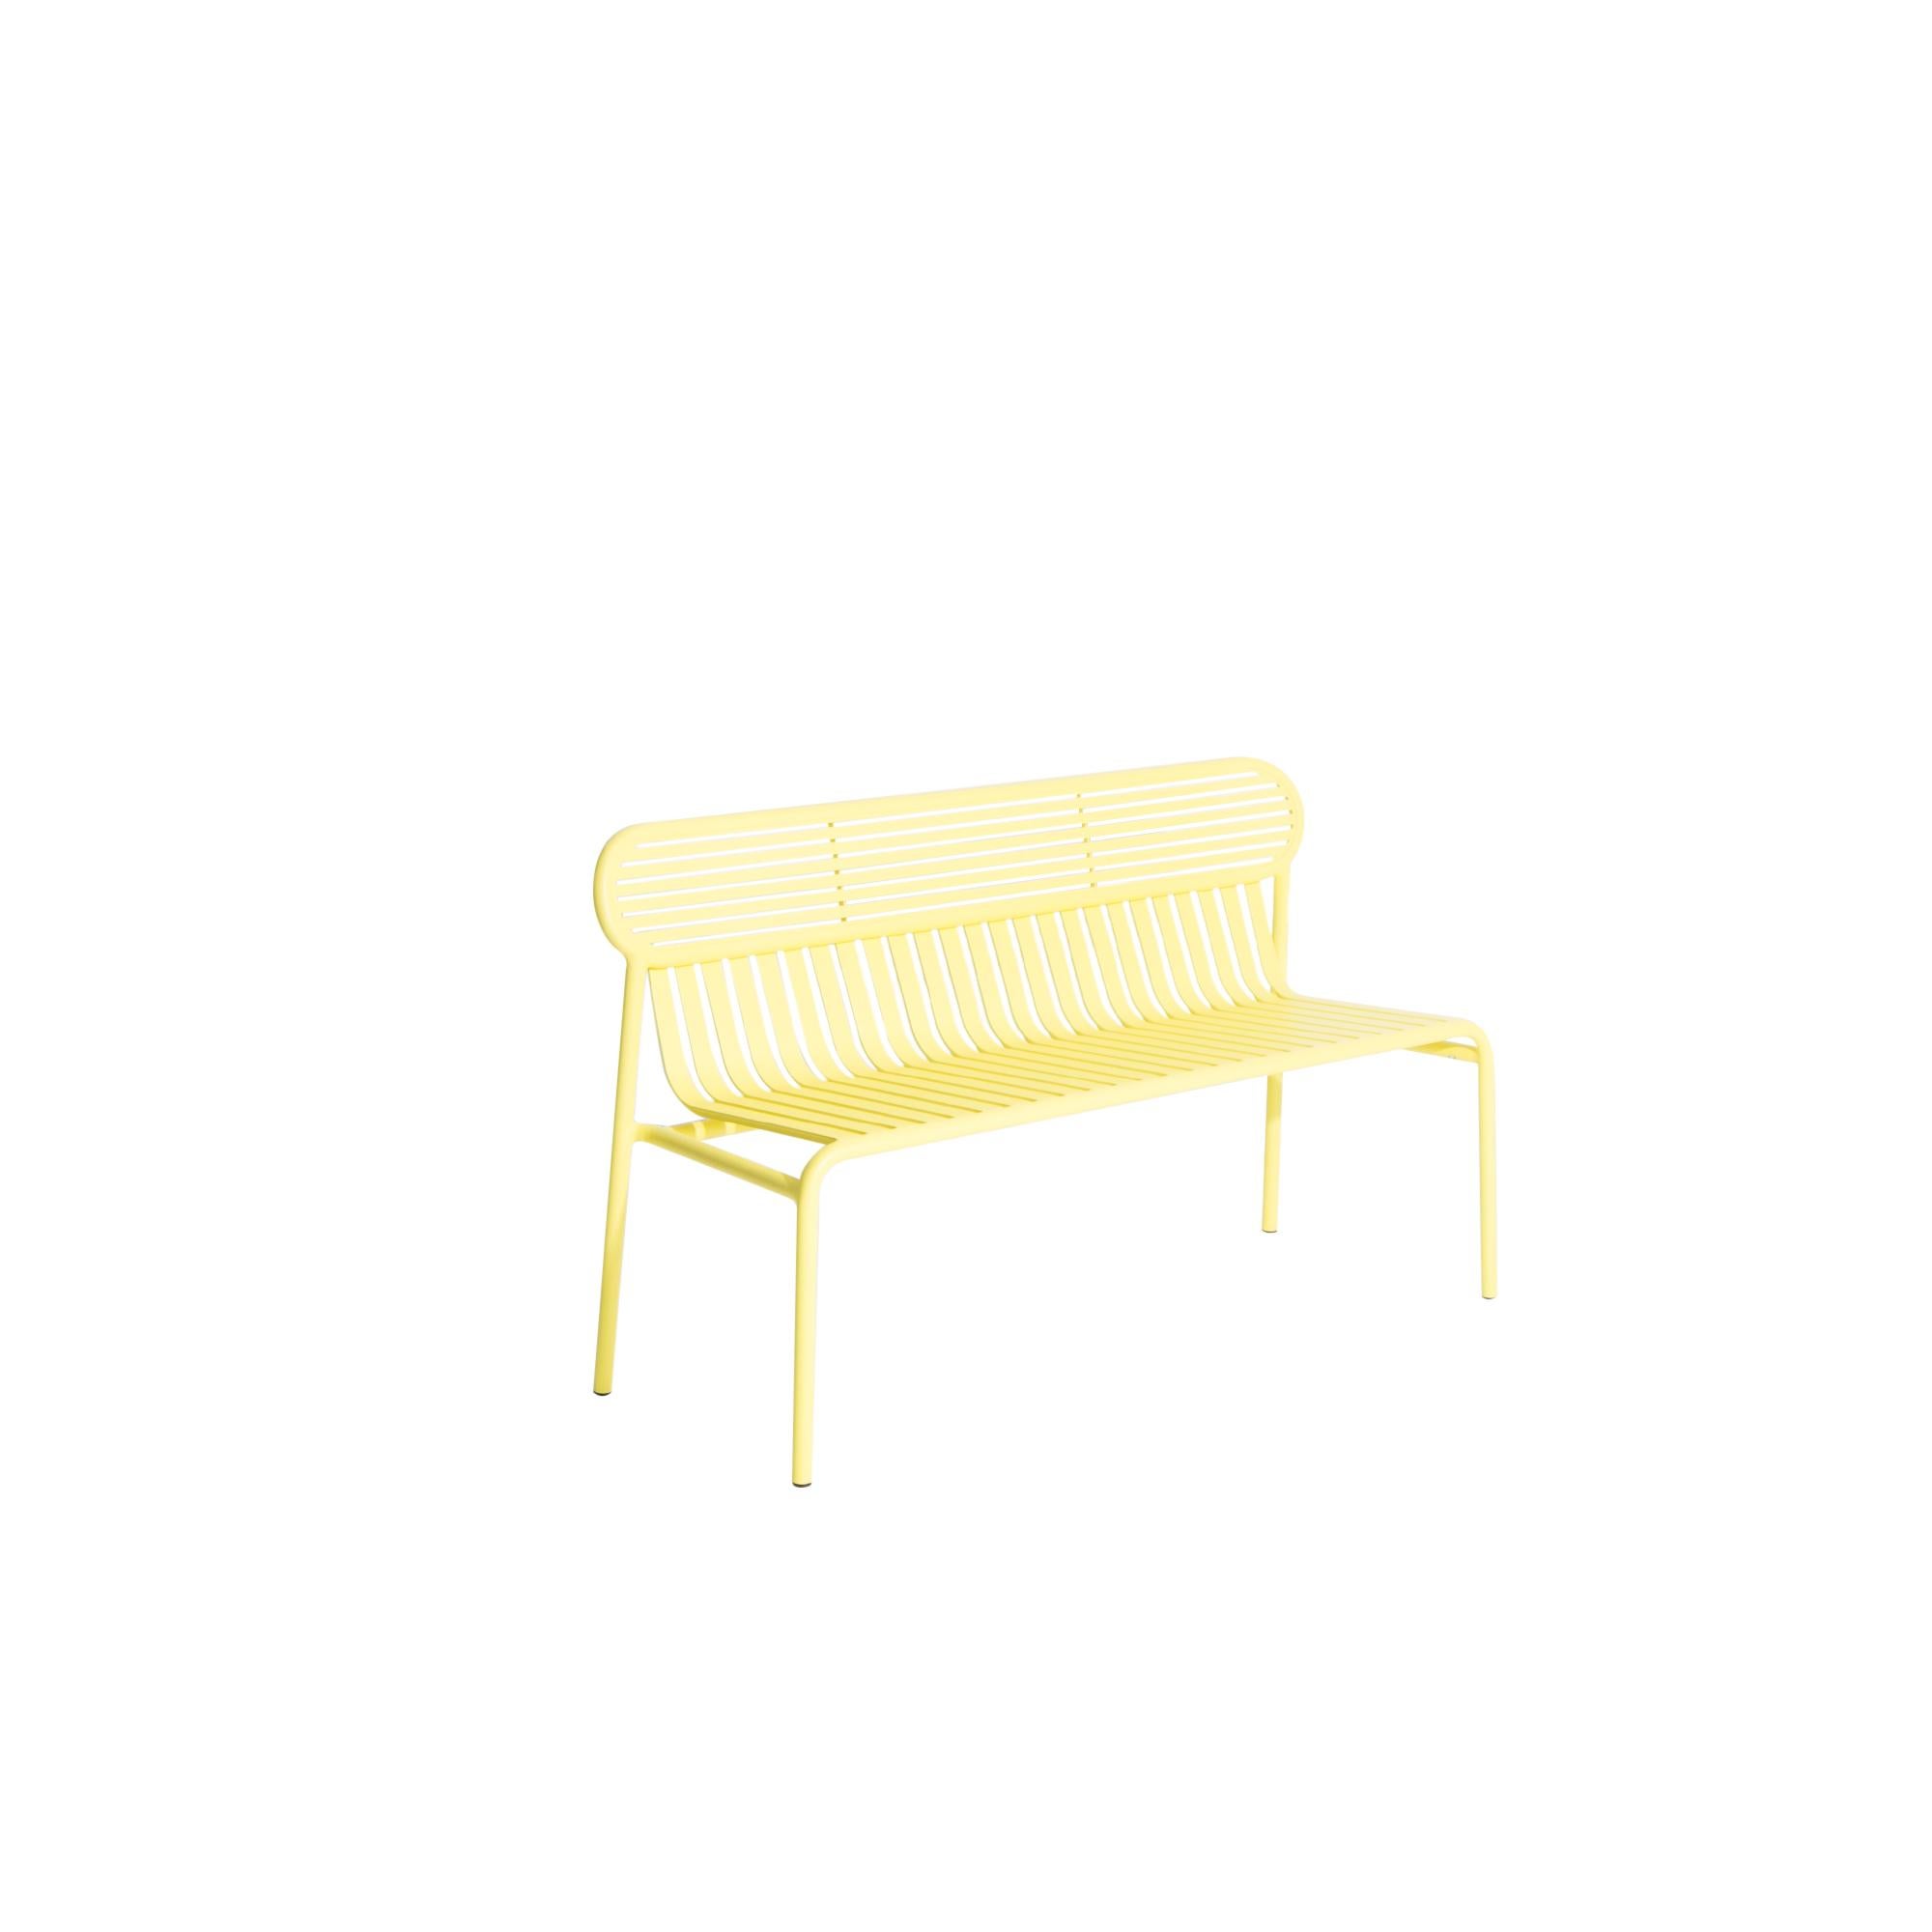 Petite Friture Week-End Bench in Yellow Aluminium by Studio BrichetZiegler, 2017

The week-end collection is a full range of outdoor furniture, in aluminium grained epoxy paint, matt finish, that includes 18 functions and 8 colours for the retail